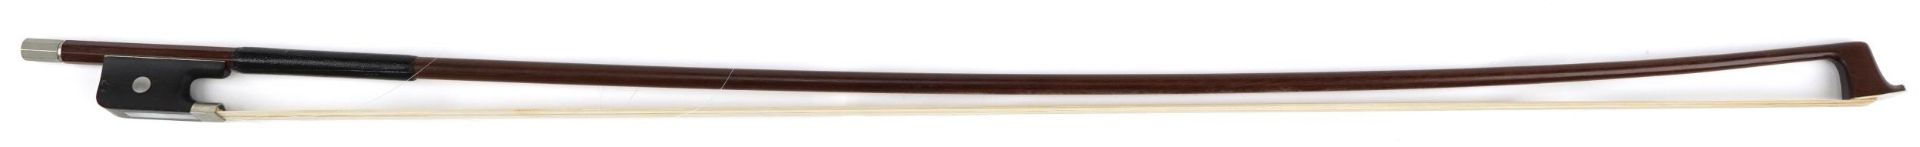 Wooden violin bow with mother of pearl frog impressed Erich Steiner, 74.5cm in length - Image 4 of 6